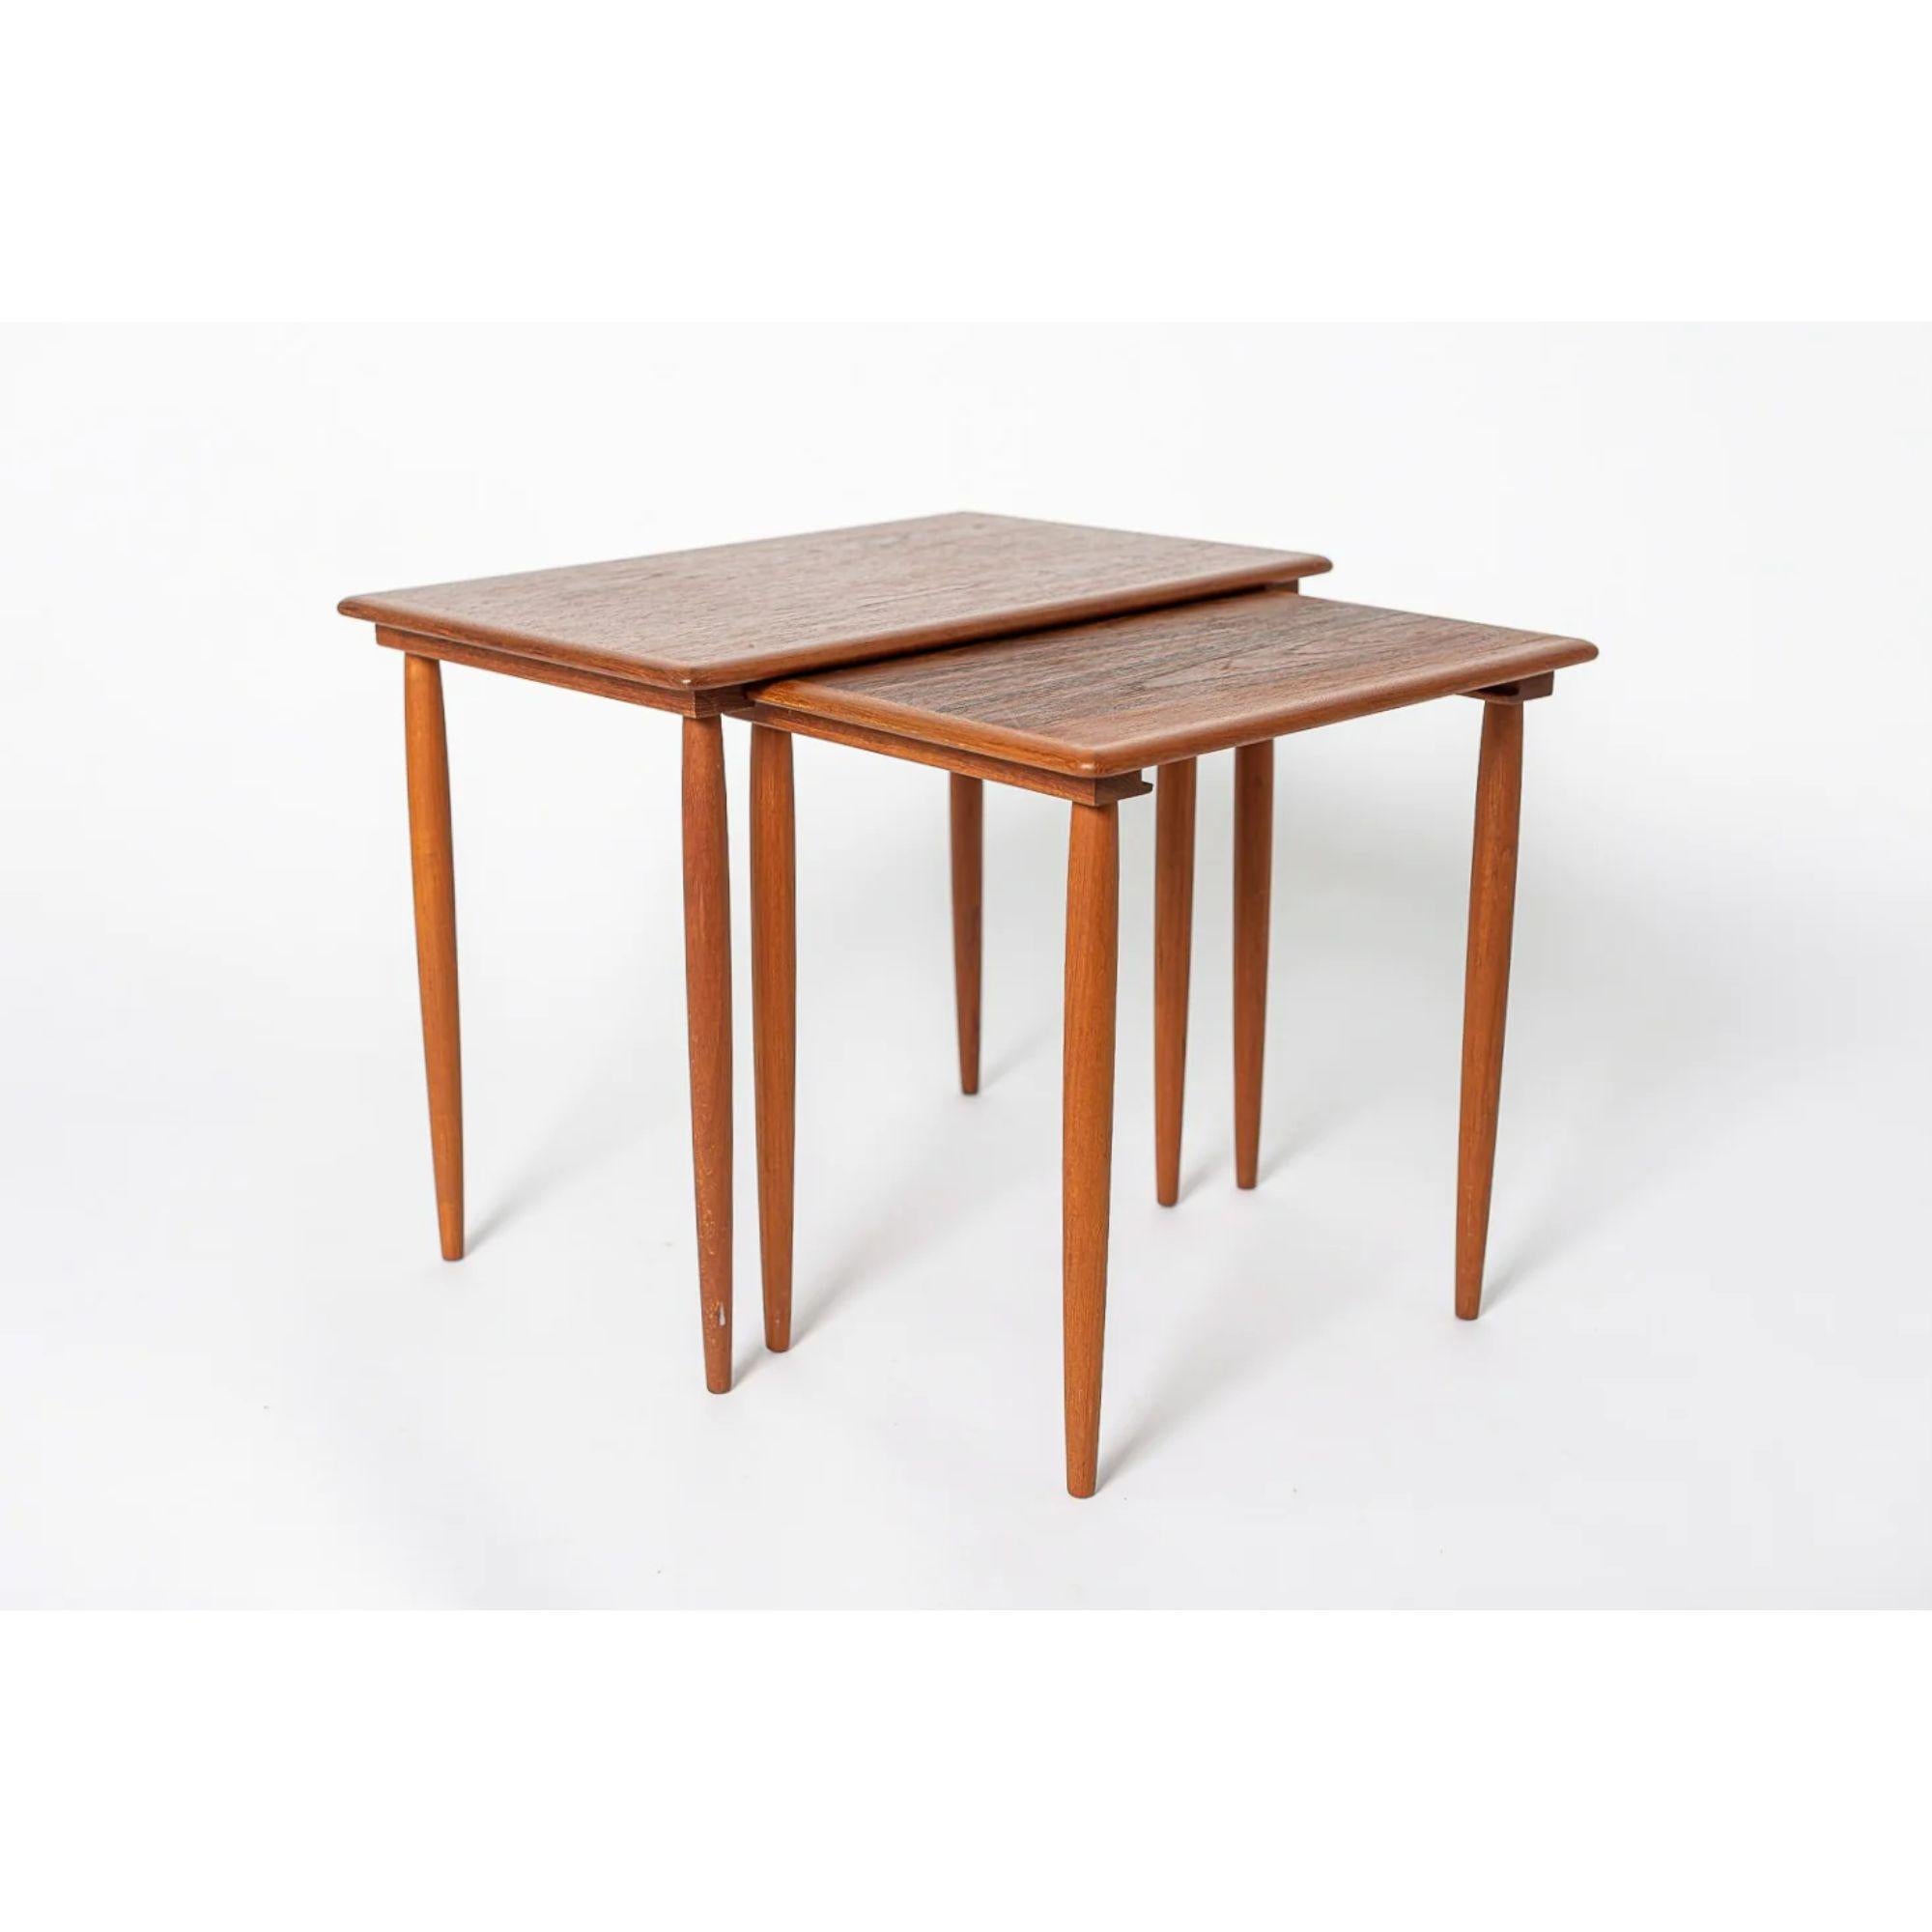 Mid Century Danish Modern Teak Wood Side Nesting Tables

This pair of vintage mid century Danish modern teak side nesting tables are circa 1960. With a classic minimalist Scandinavian design, the end tables have clean lines and gentle curves and